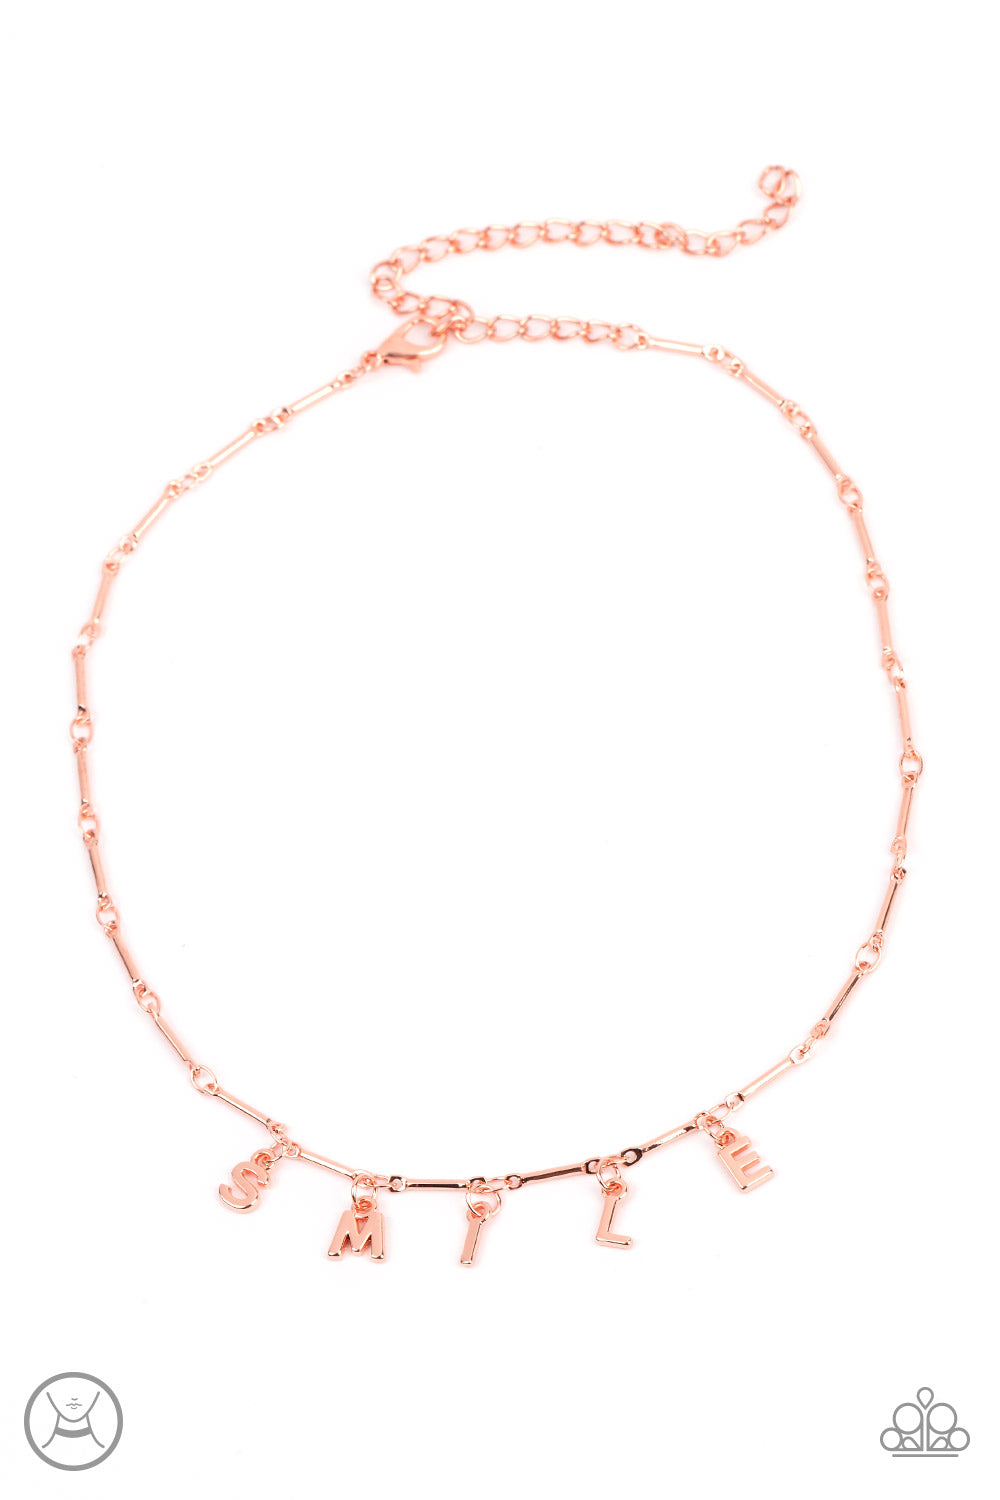 Paparazzi Accessories - Say My Name - Copper Choker Necklaces separated by dainty copper rods, copper letters spell out the word SMILE in a soft, and simple manner. Features an adjustable clasp closure.  Sold as one individual choker necklace. Includes one pair of matching earrings.